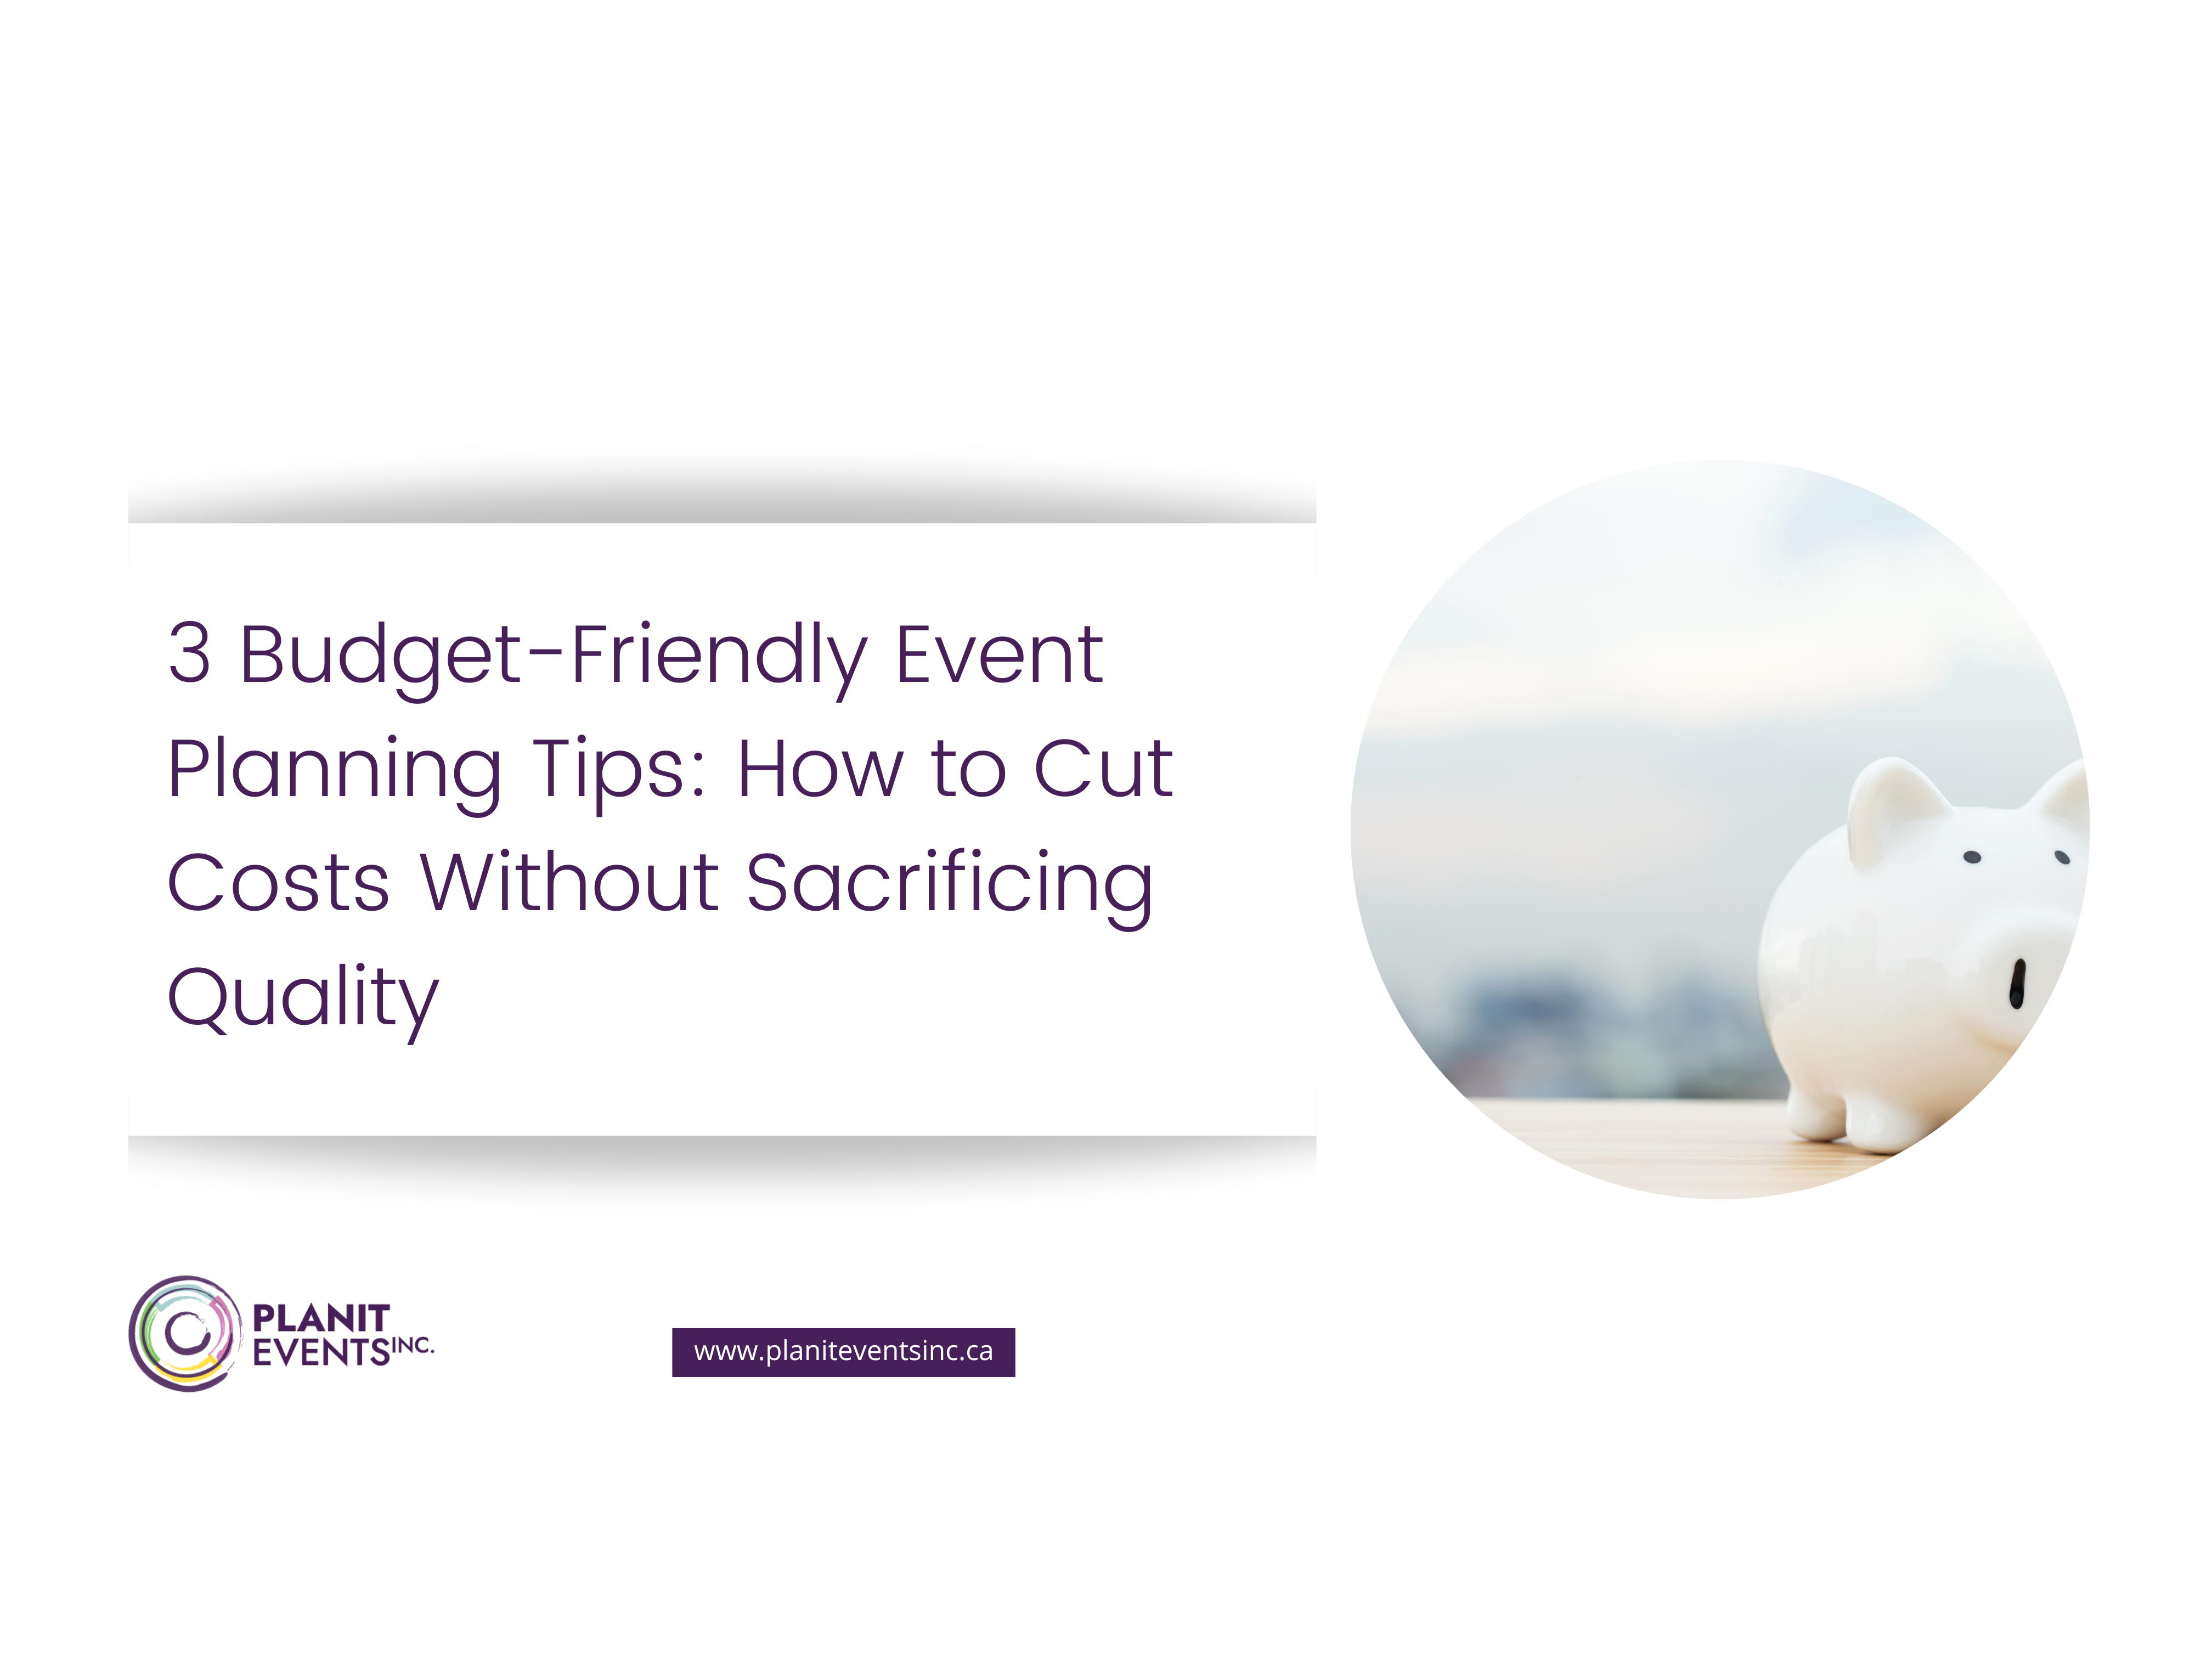 3 Budget-Friendly Event Planning Tips How to Cut Costs Without Sacrificing Quality